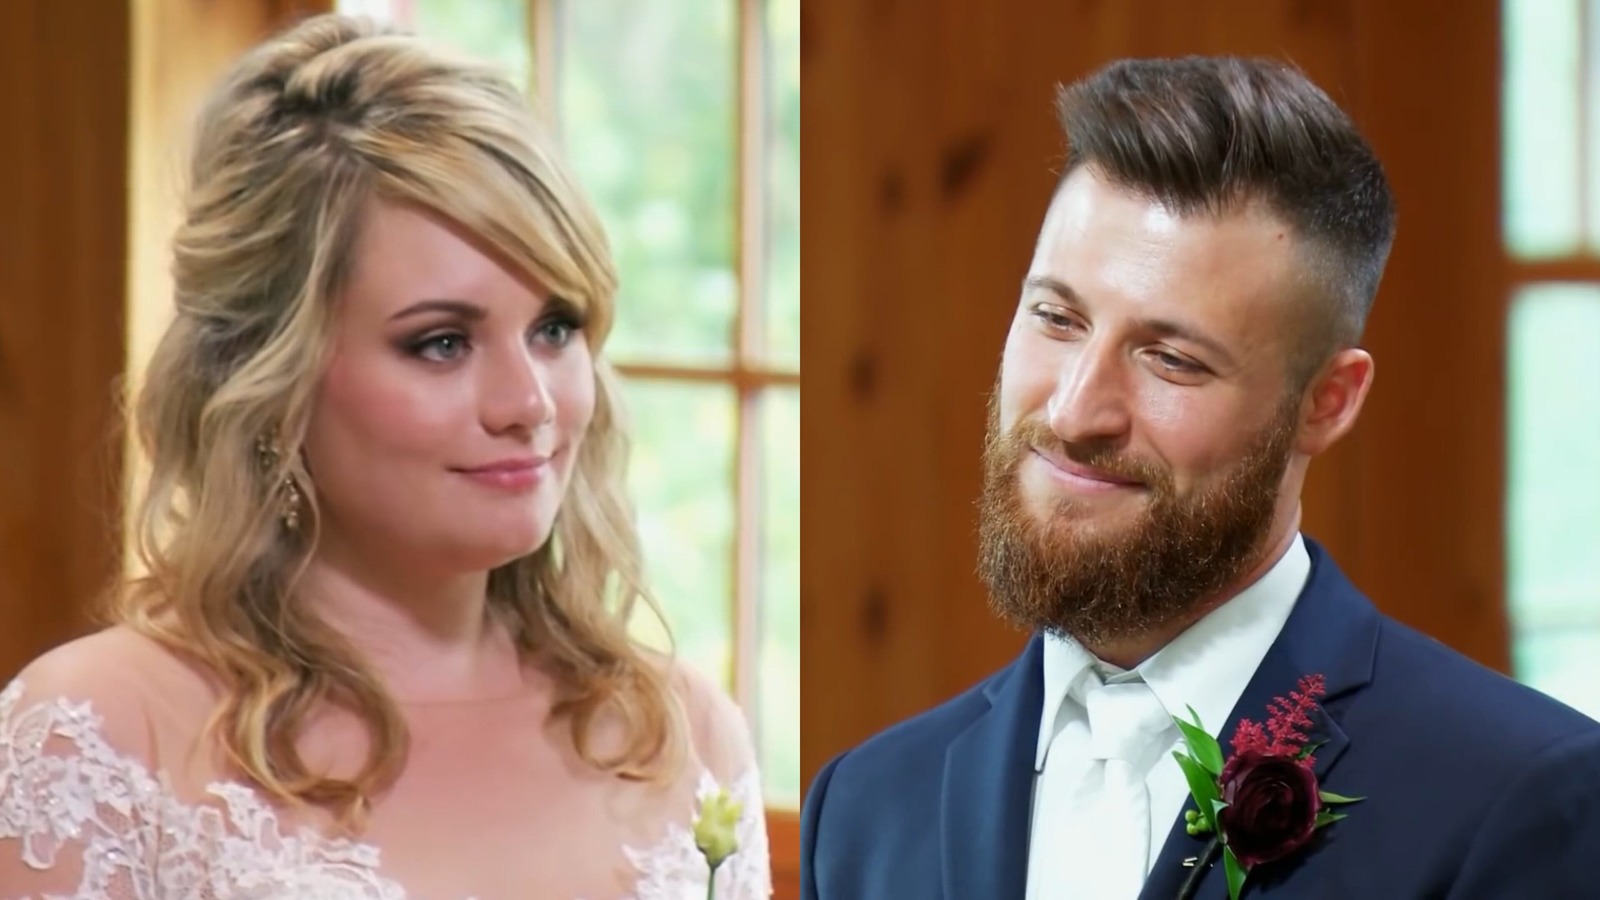 Married At First Sight: The Reason Luke Cuccurullo And Kate Sisk Split